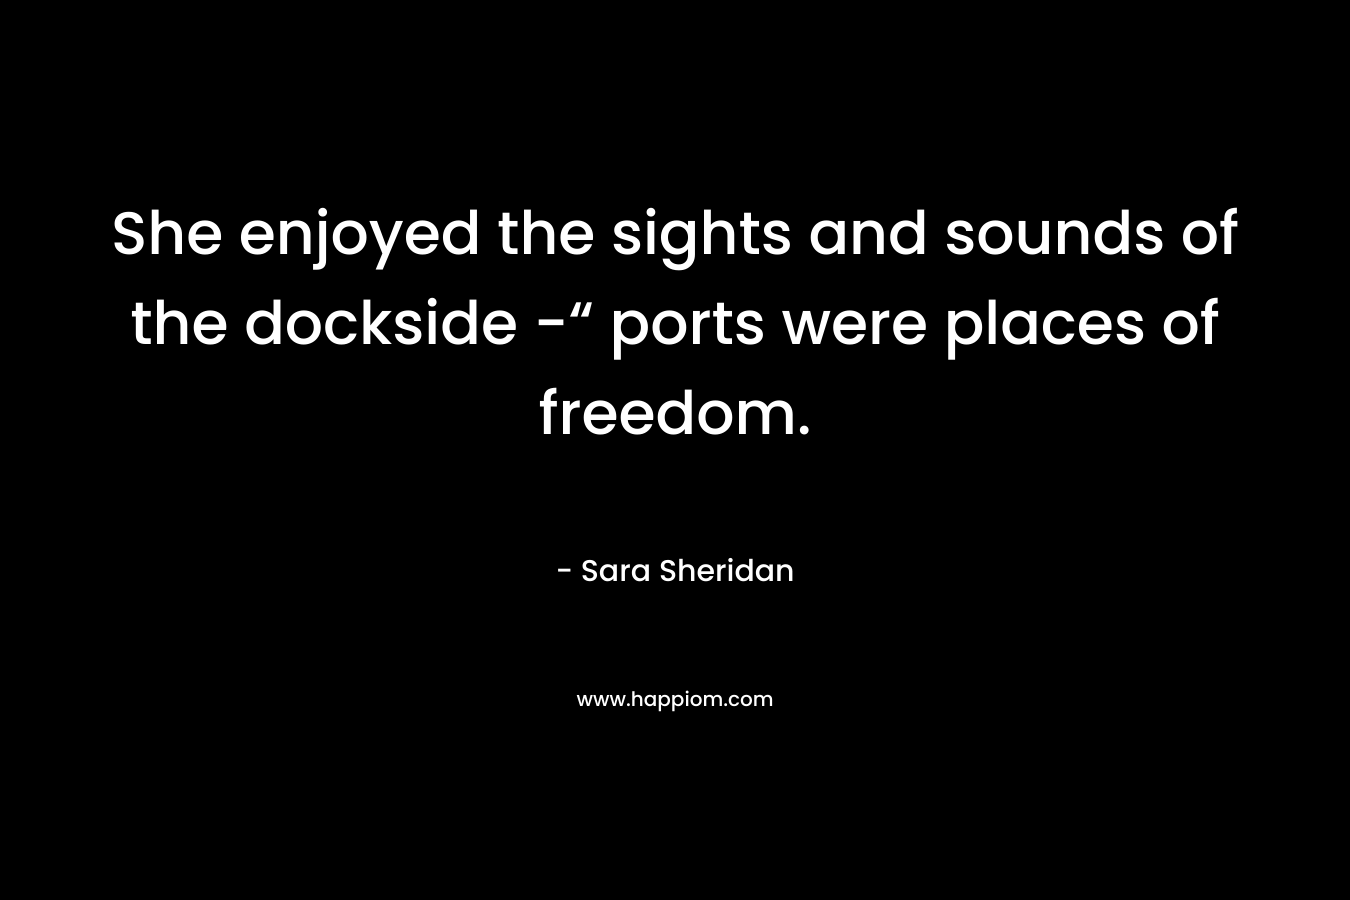 She enjoyed the sights and sounds of the dockside -“ ports were places of freedom.